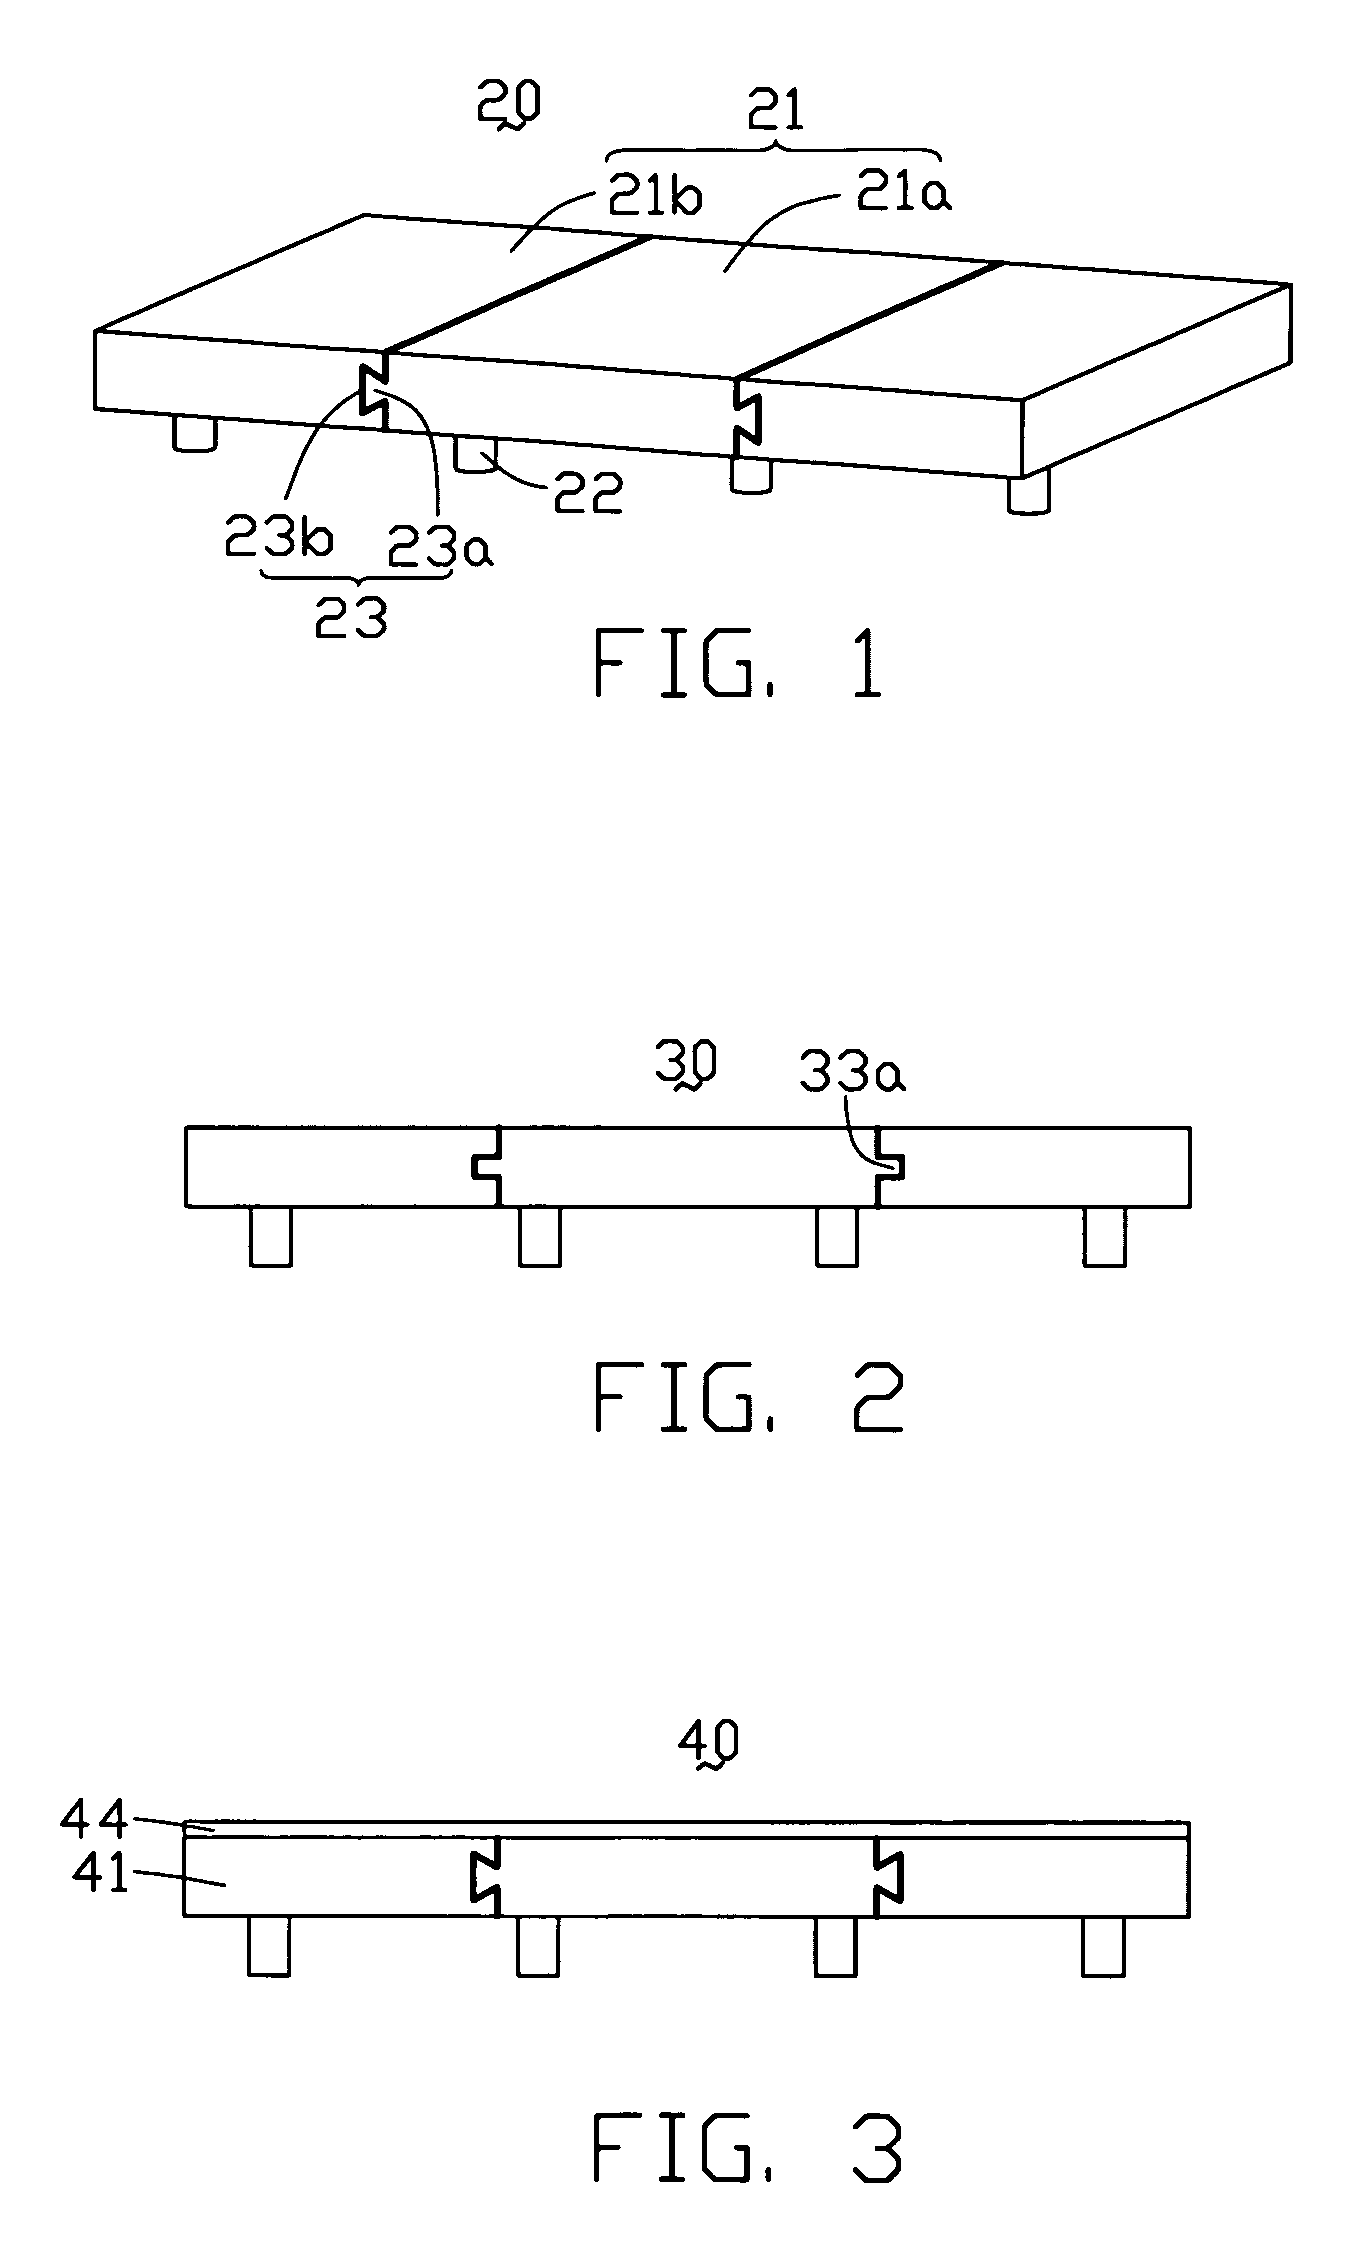 Diffusion plate and backlight module using the same